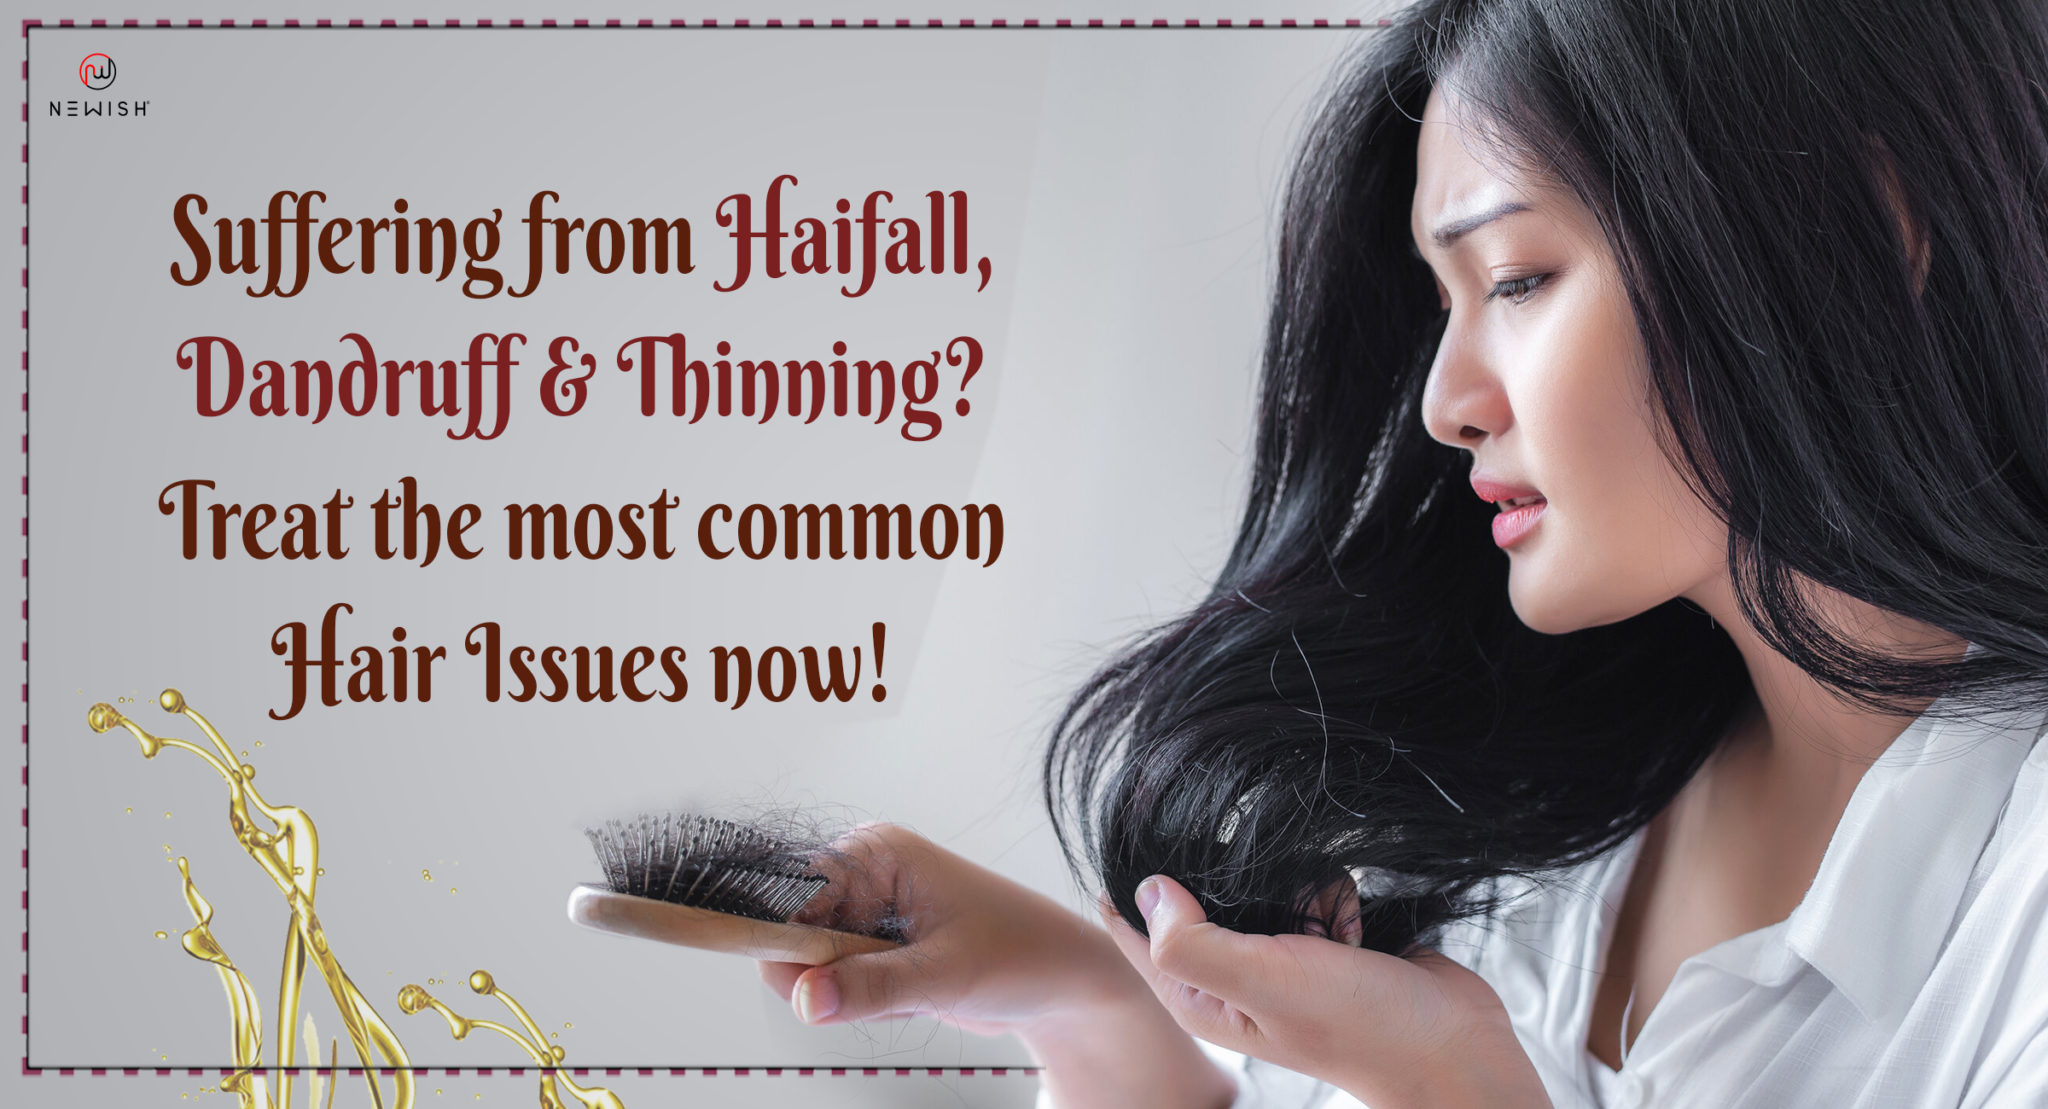 Hair problems? We have a solution for hair fall & dandruff | Newish